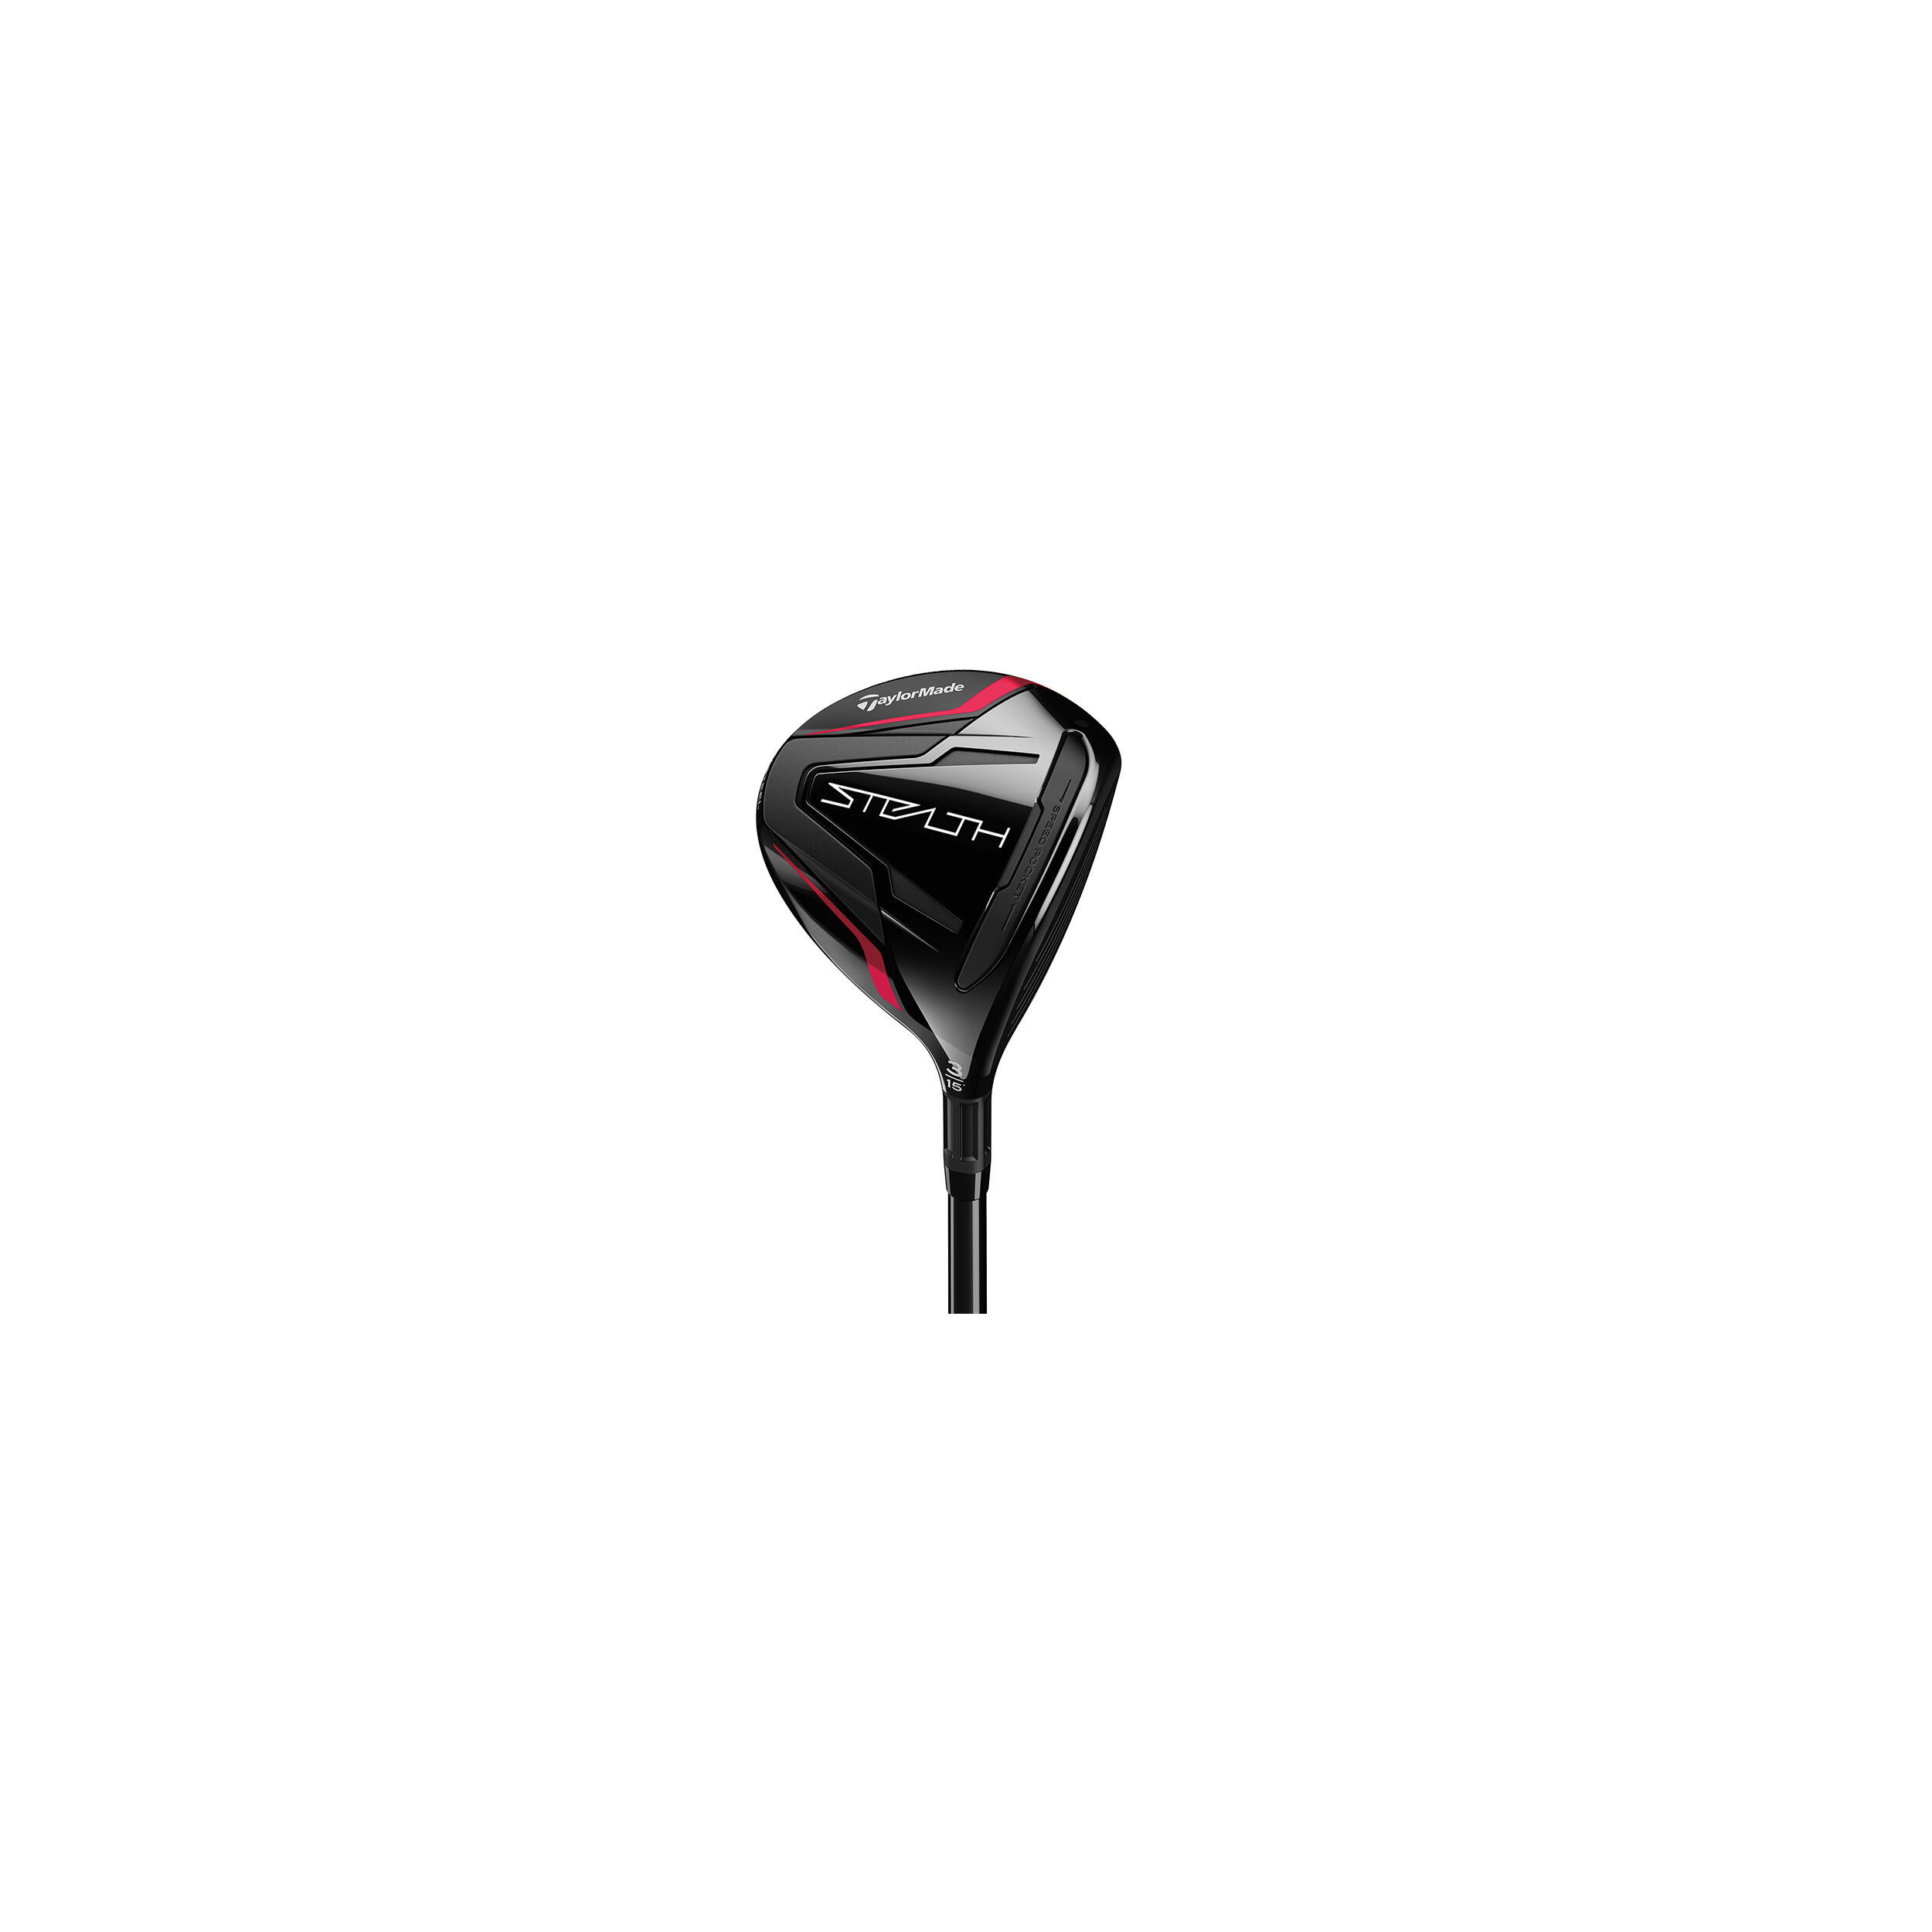 THE STREET WOOD TAYLORMADE STEALTH 3HL 16.5o